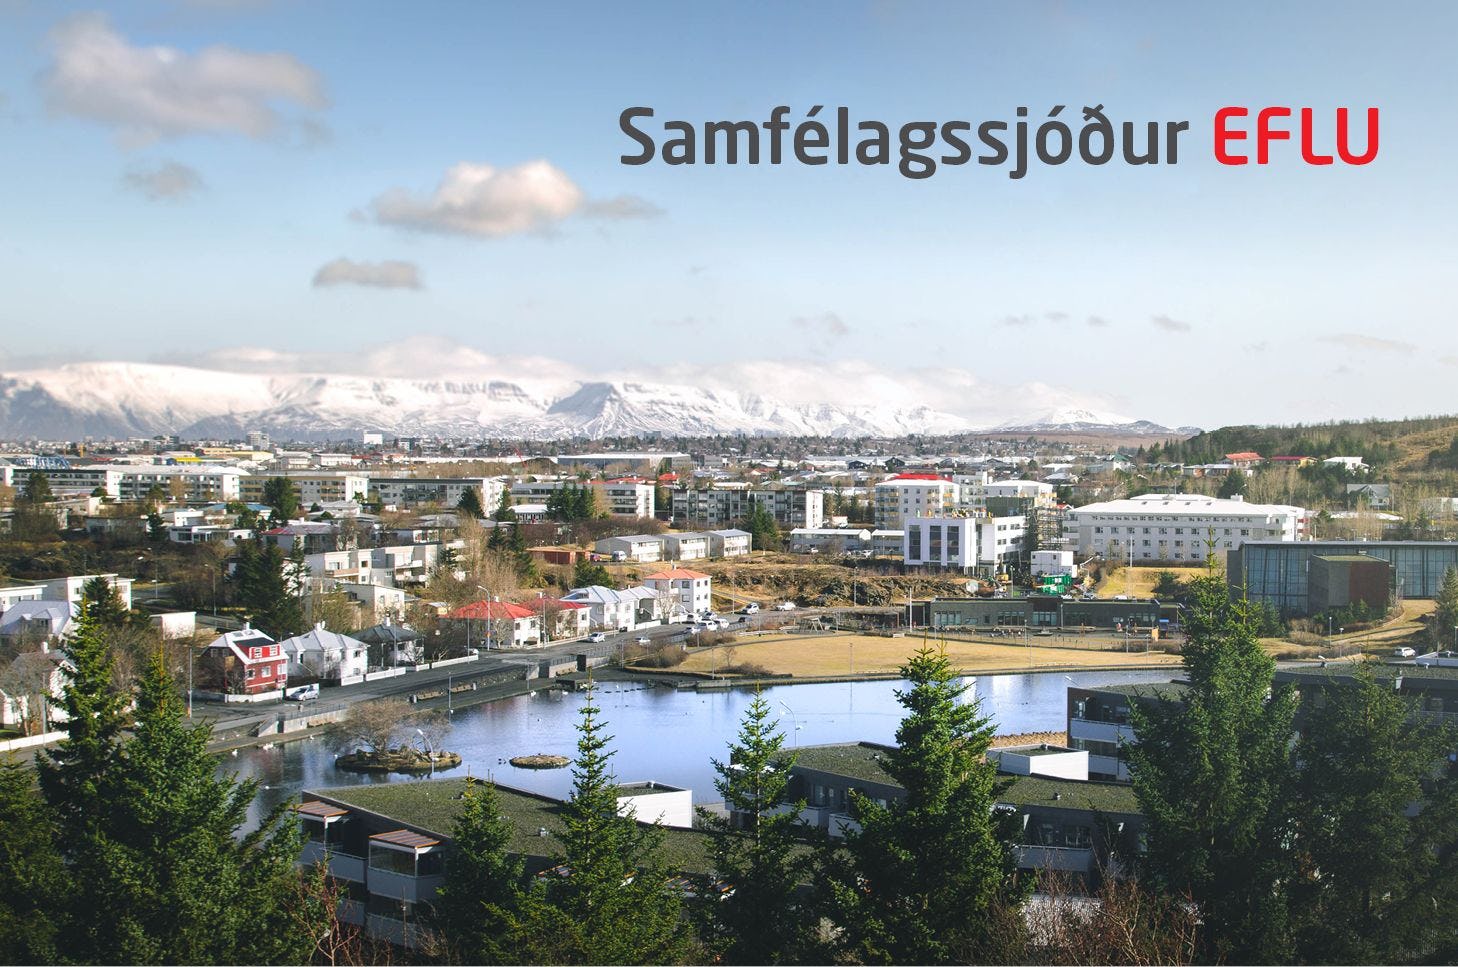 A scenic view of of a town with residential building, trees and mountain range in the background. The image also displays text reading "Samfelagssjodur EFLU"